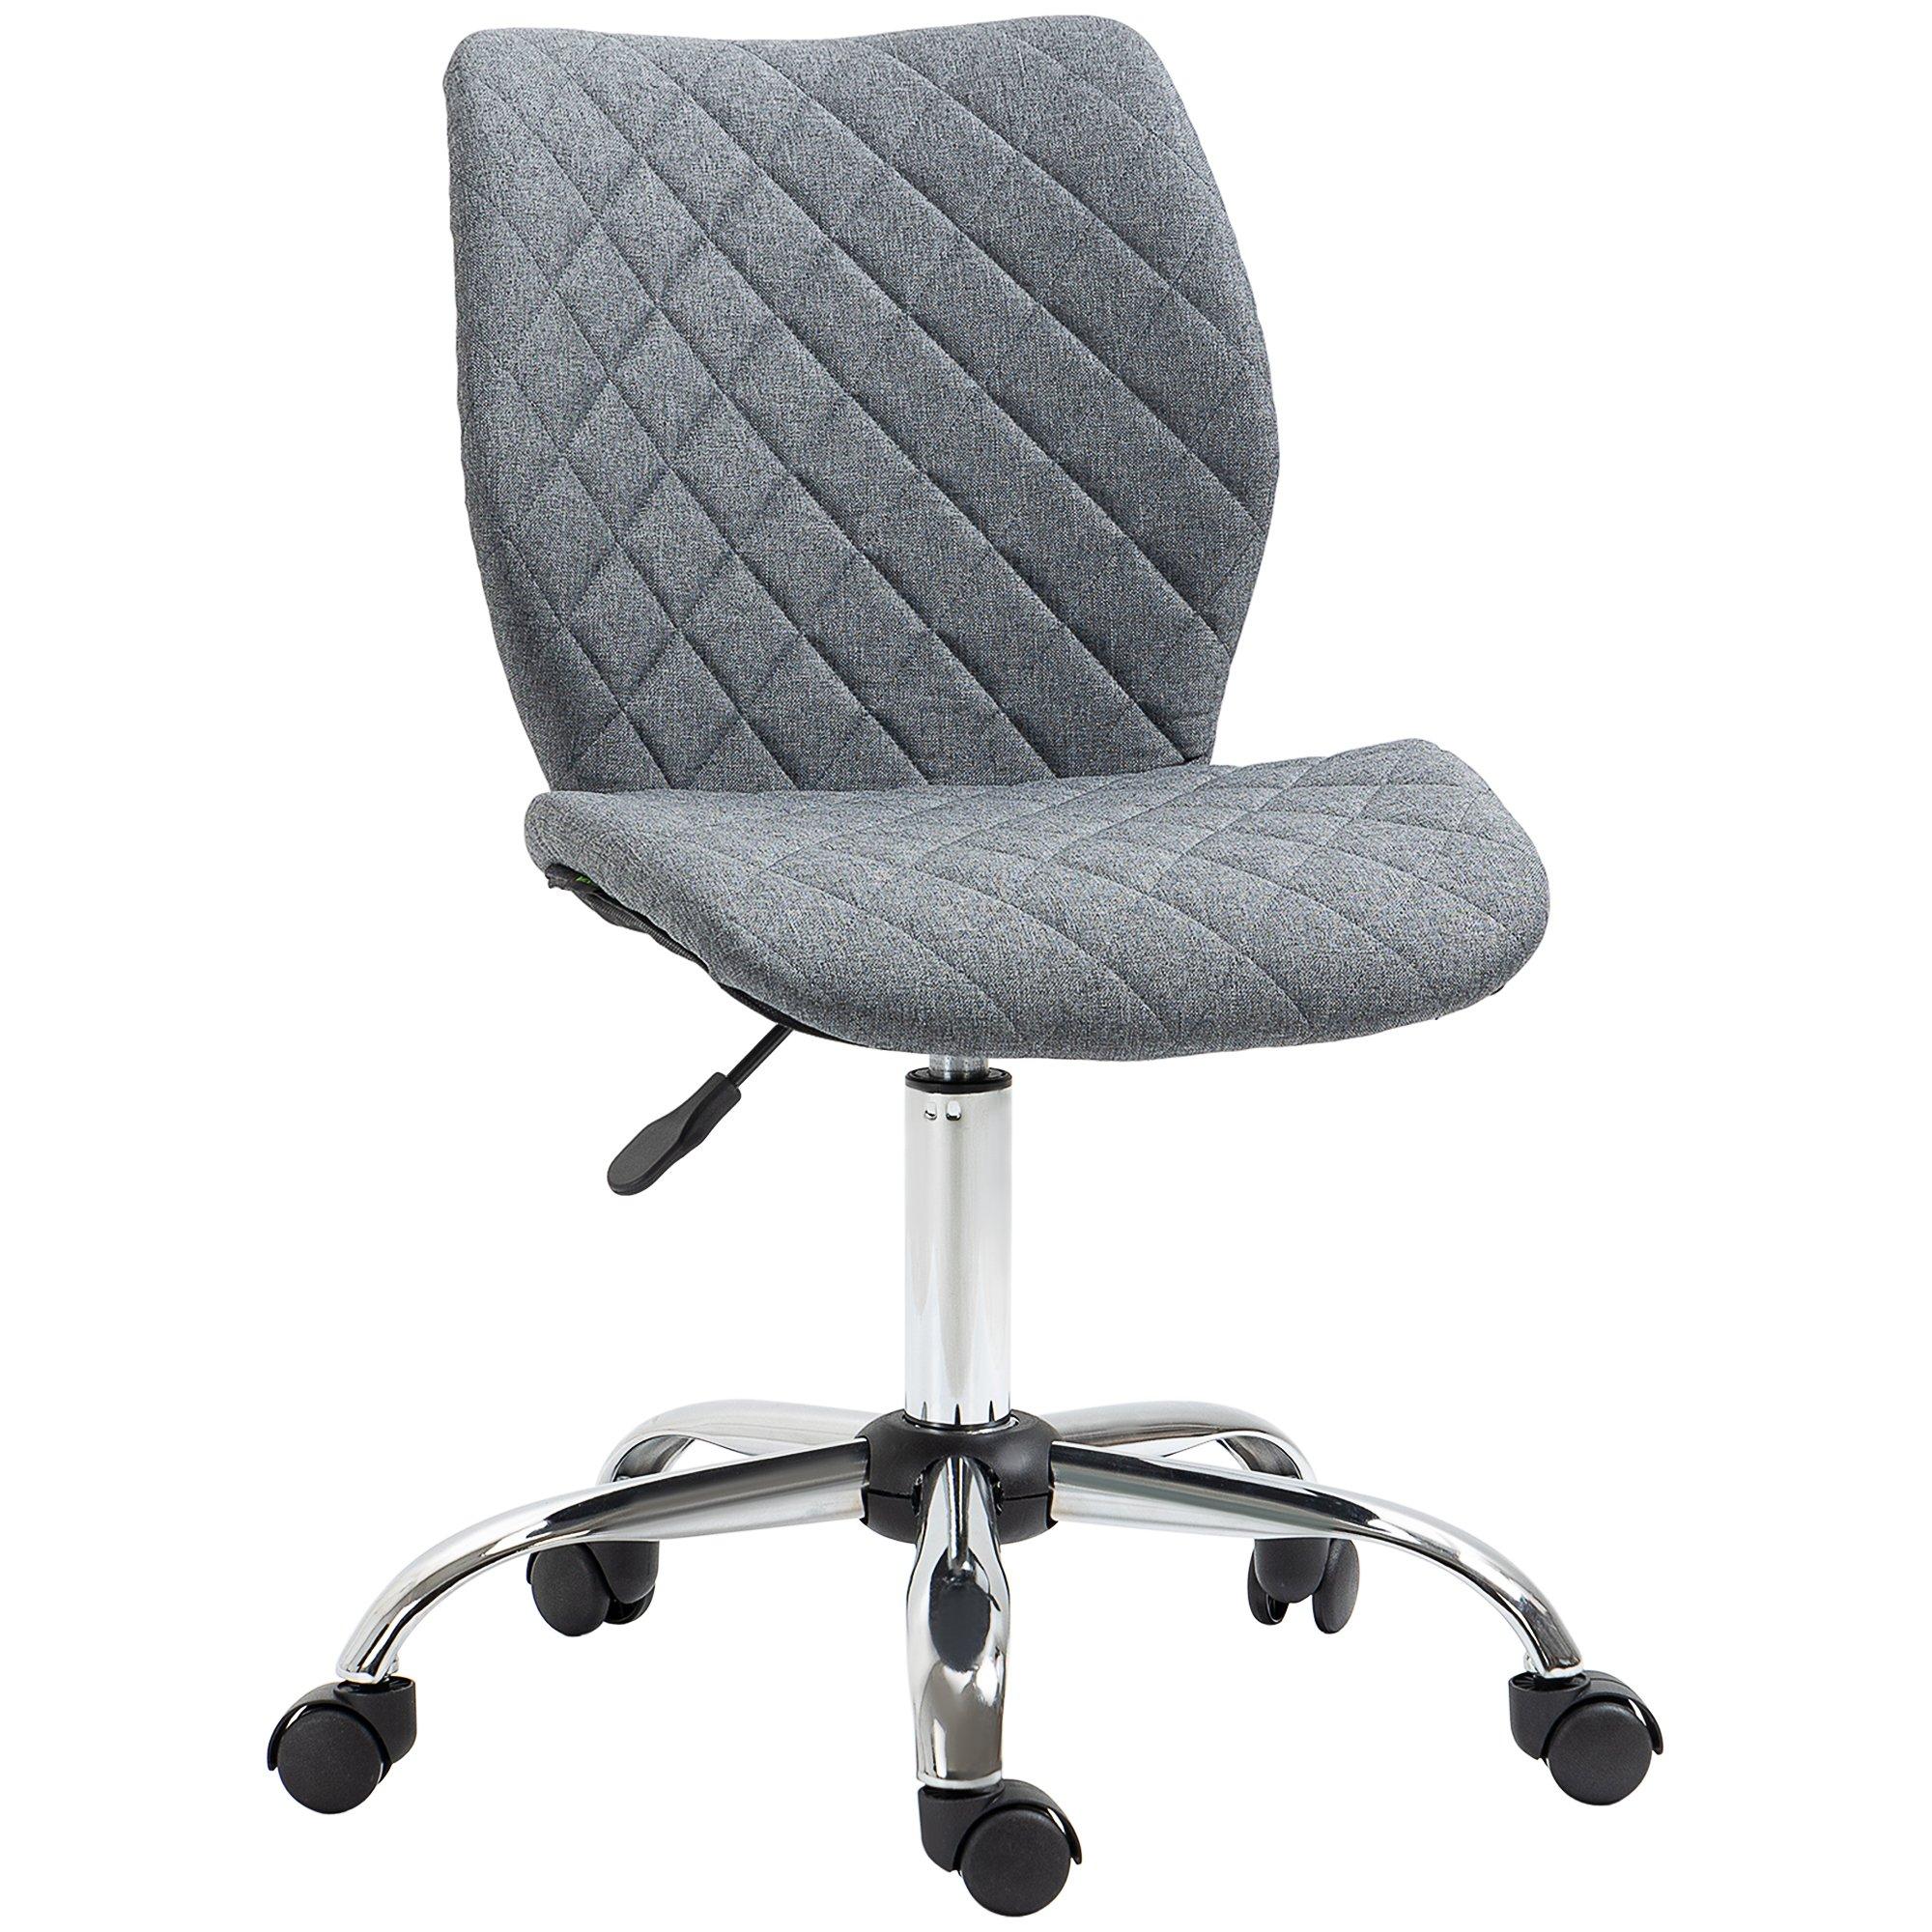 Ergonomic Mid Back Office Chair Height Adjustable Home Office